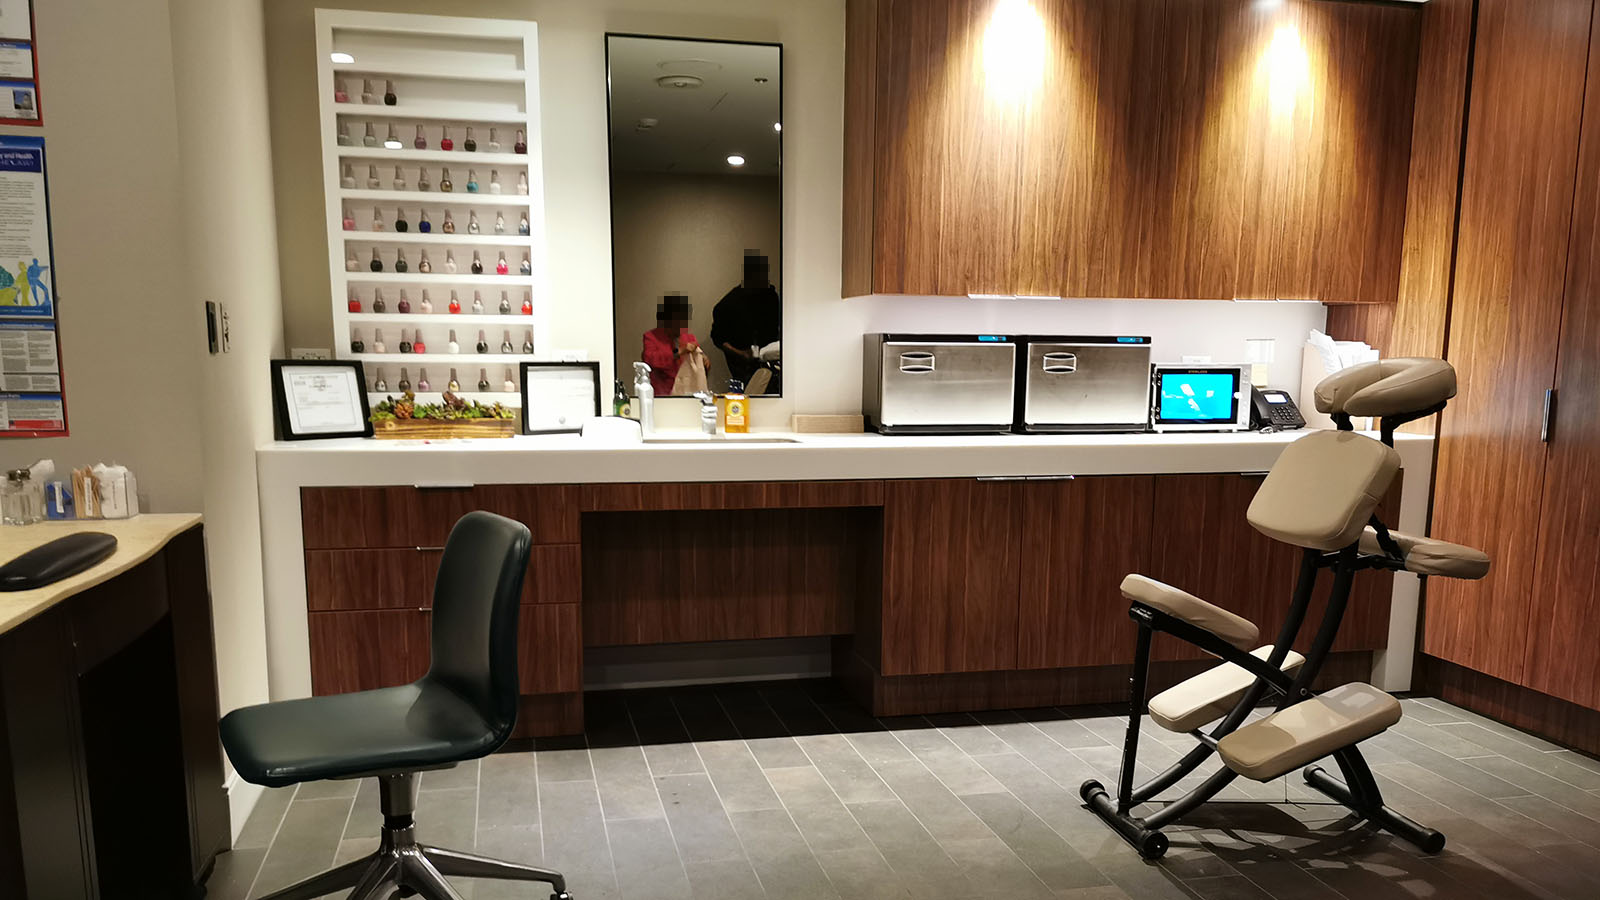 Treatment zone at the Amex Centurion Lounge in Los Angeles